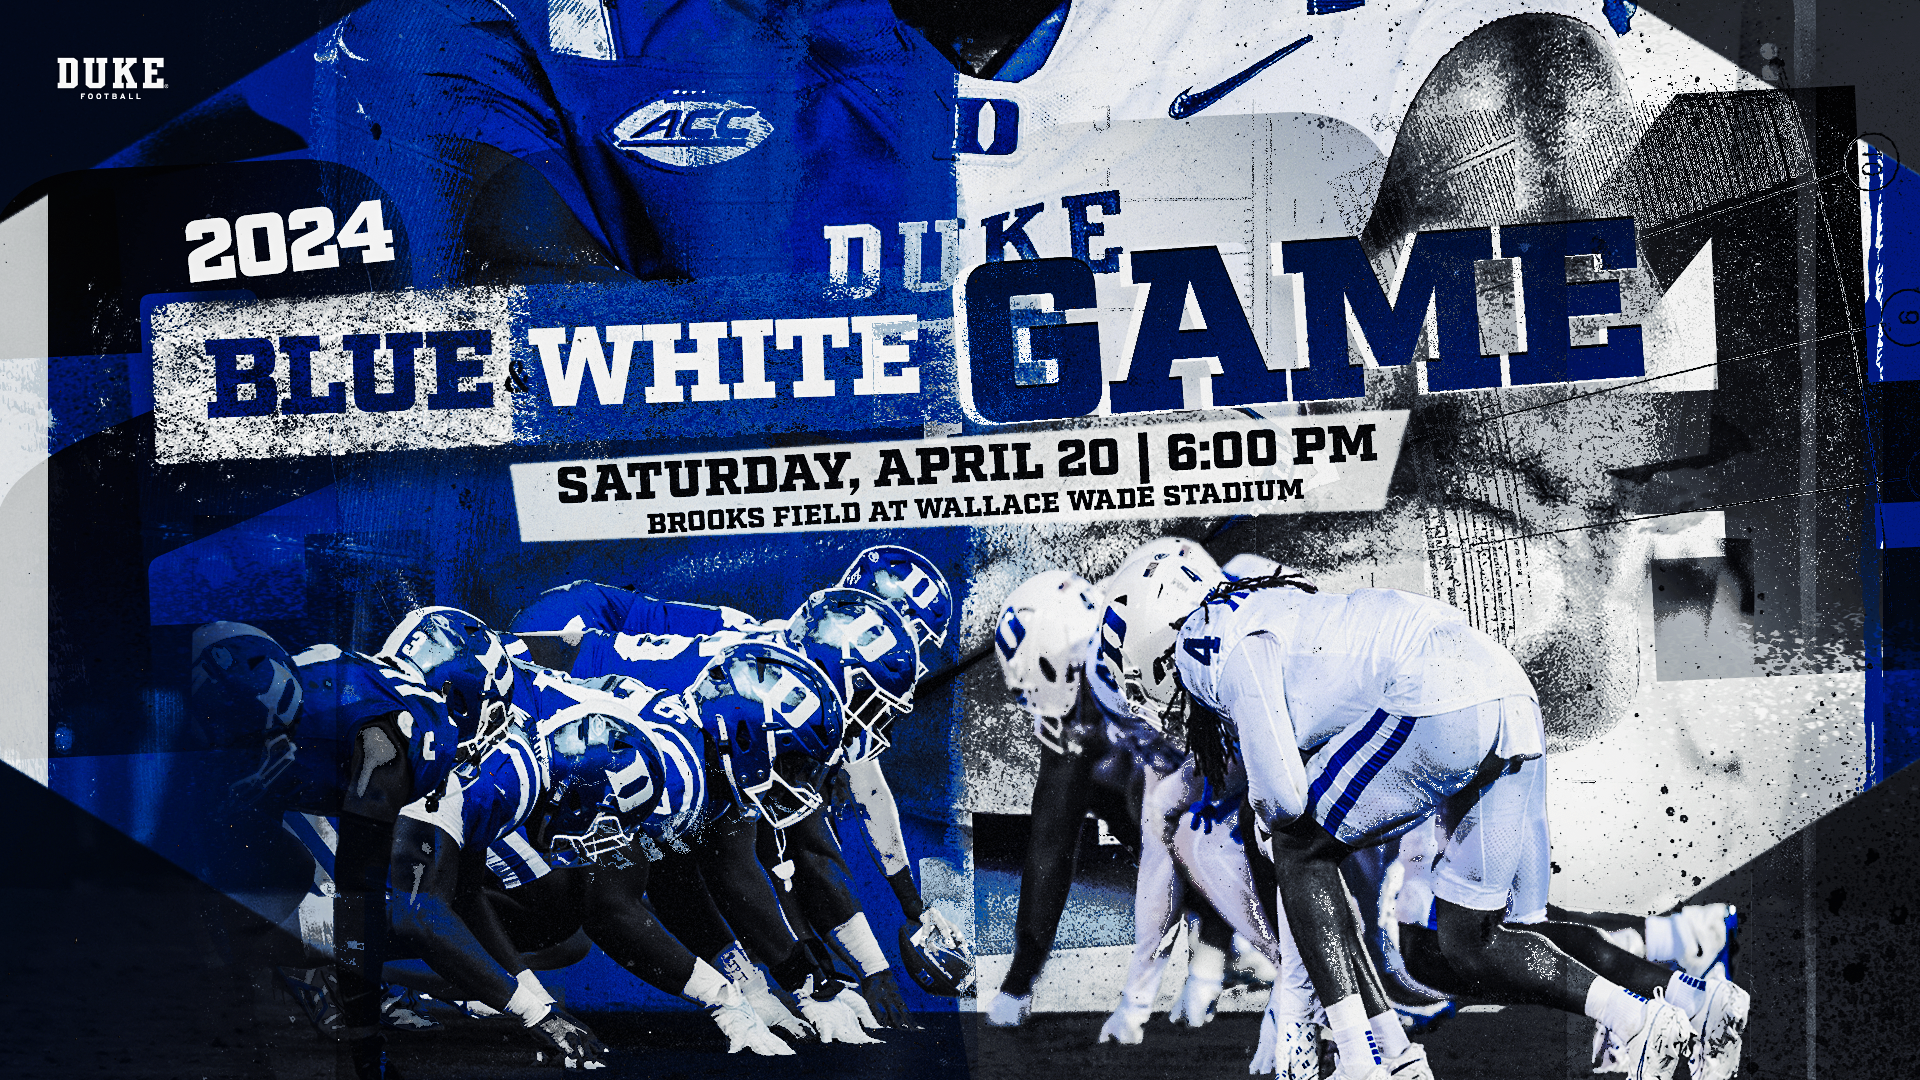 Duke football fans will have their first chance to see the Blue Devils in person under newly appointed head coach Manny Diaz on Saturday, April 20 for the Blue & White Game.